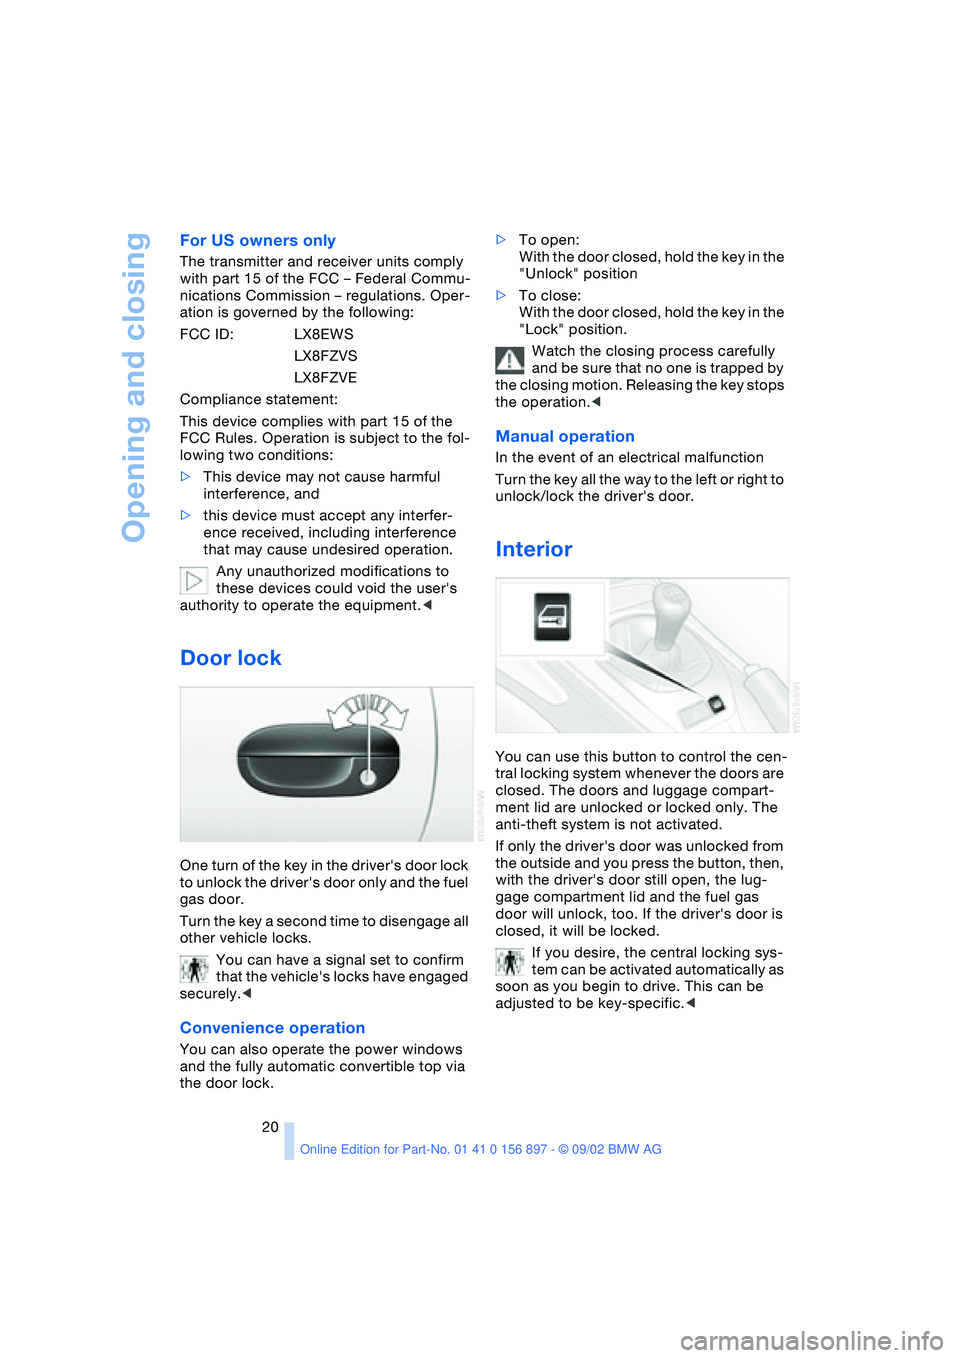 BMW 3.0i ROADSTER 2003 User Guide Opening and closing
20
For US owners only
The transmitter and receiver units comply 
with part 15 of the FCC – Federal Commu-
nications Commission – regulations. Oper-
ation is governed by the fol